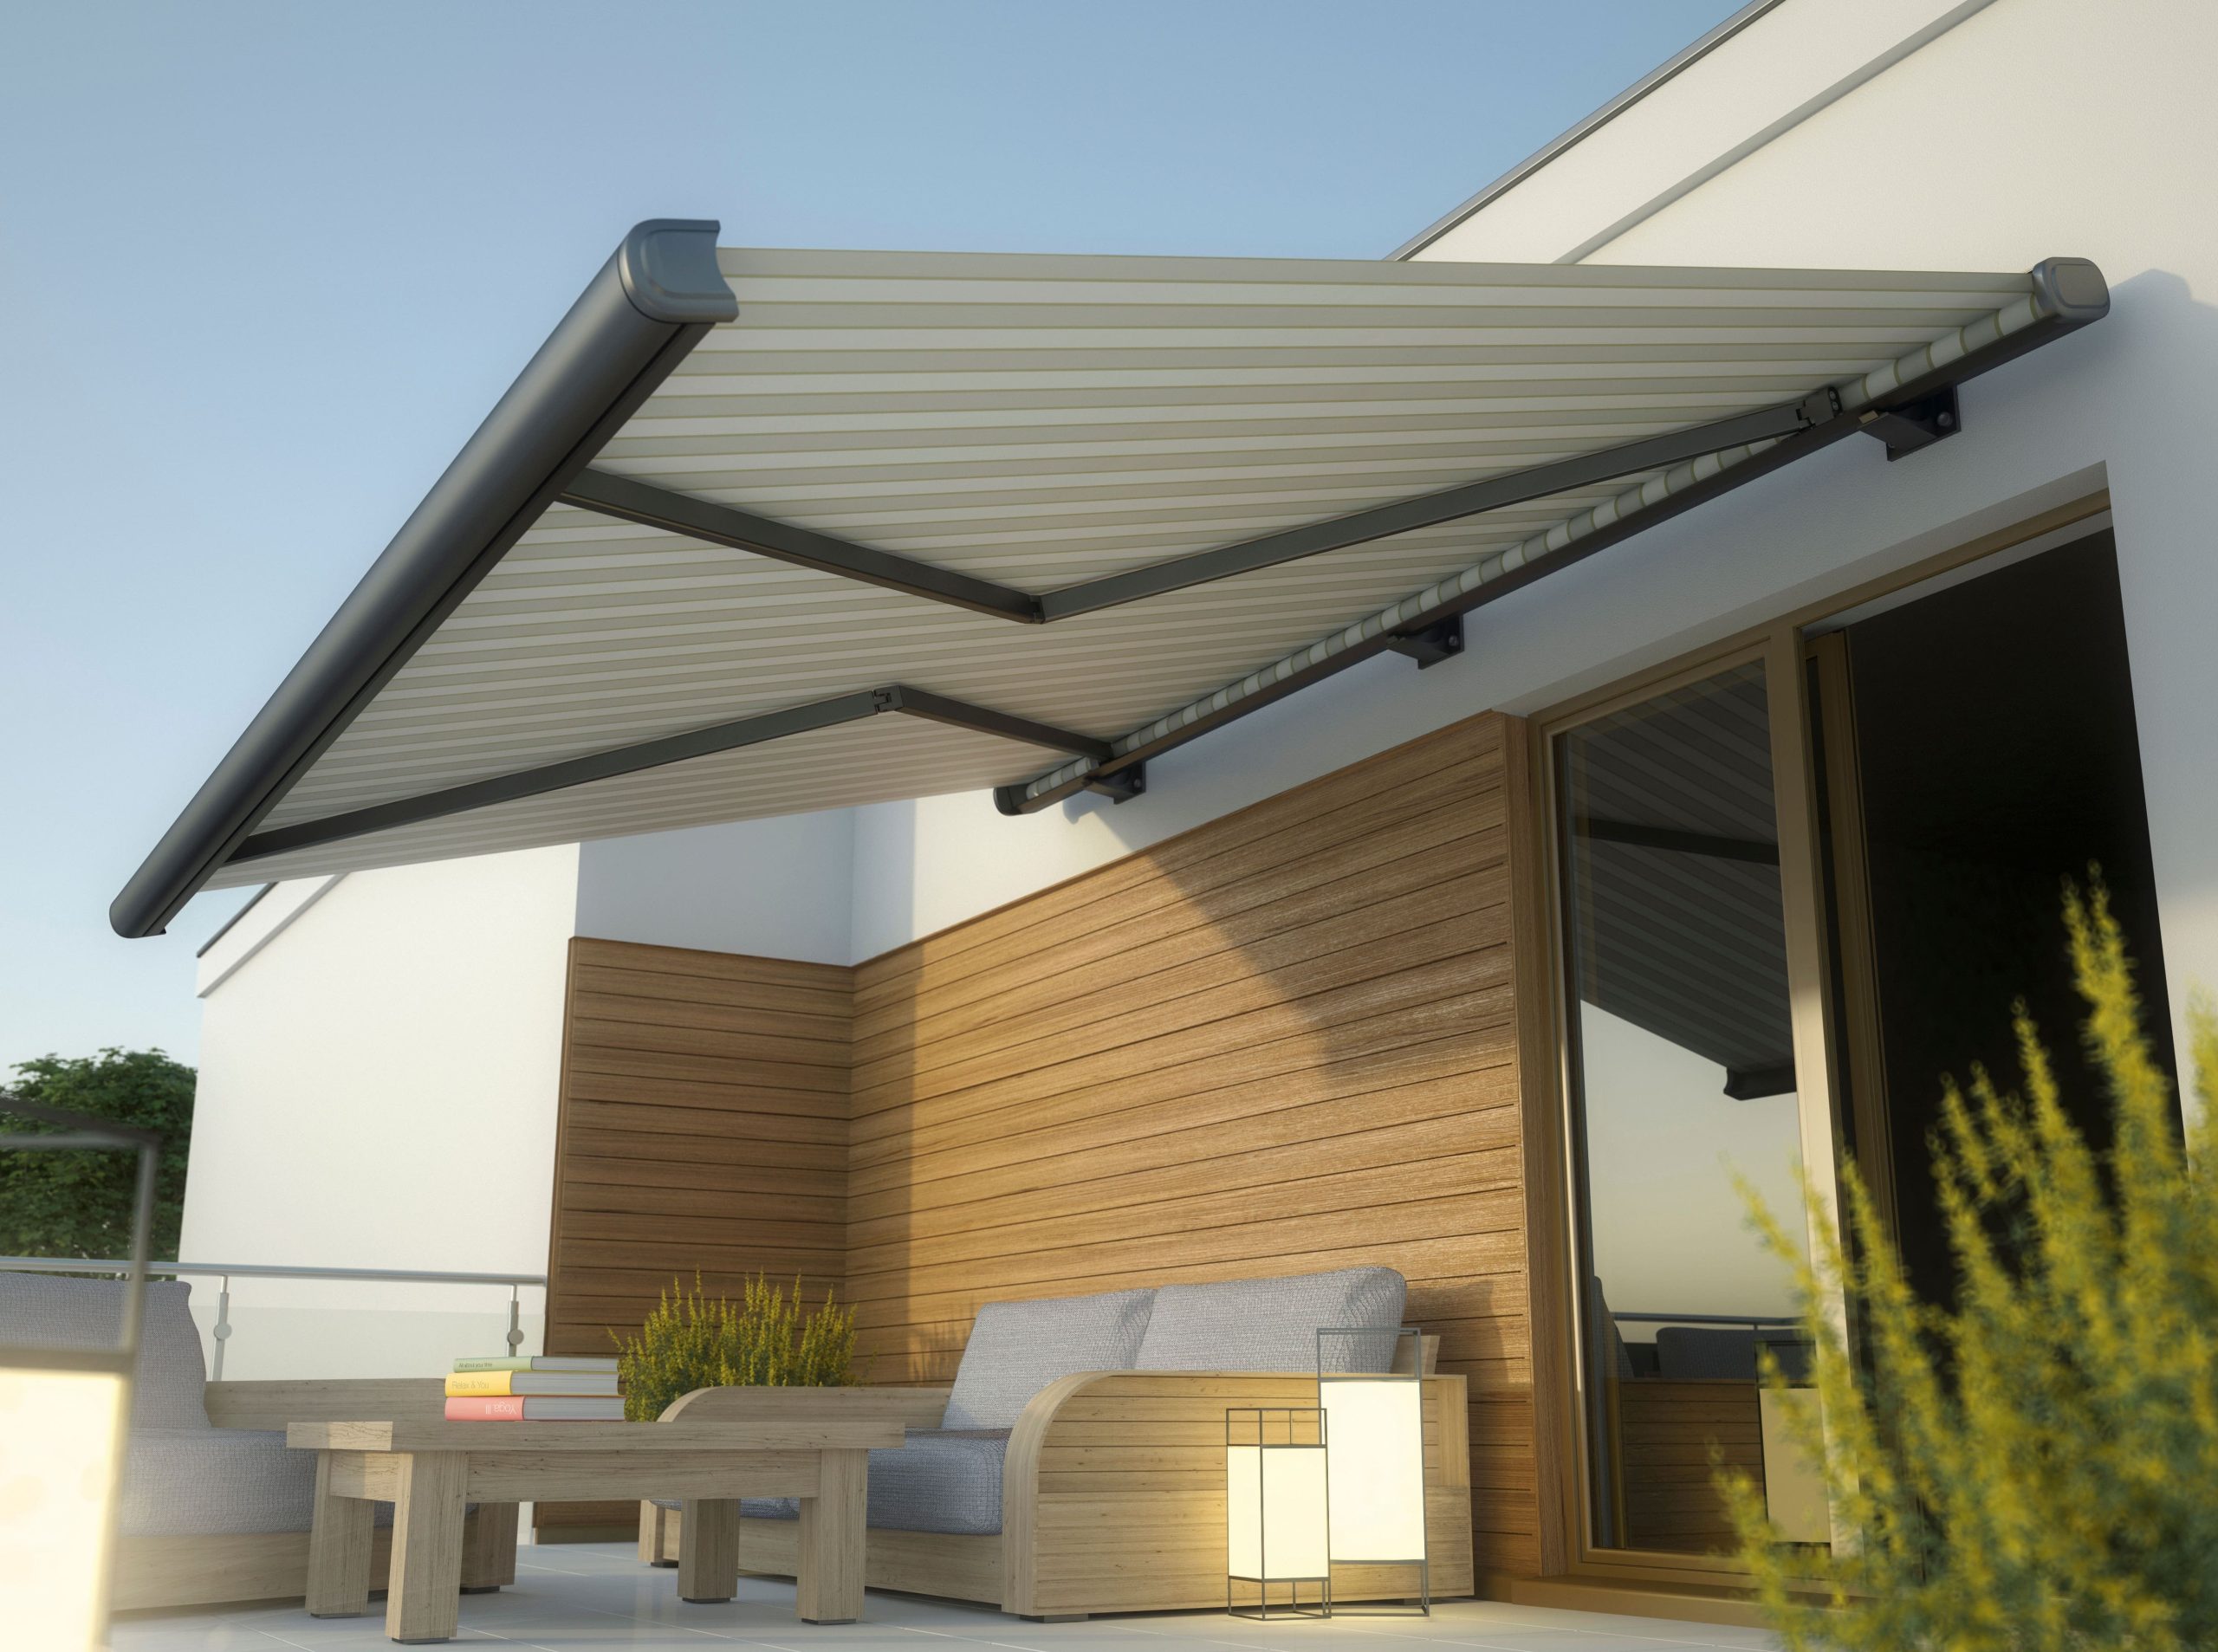 Custom retractable awnings installation in Tallahassee